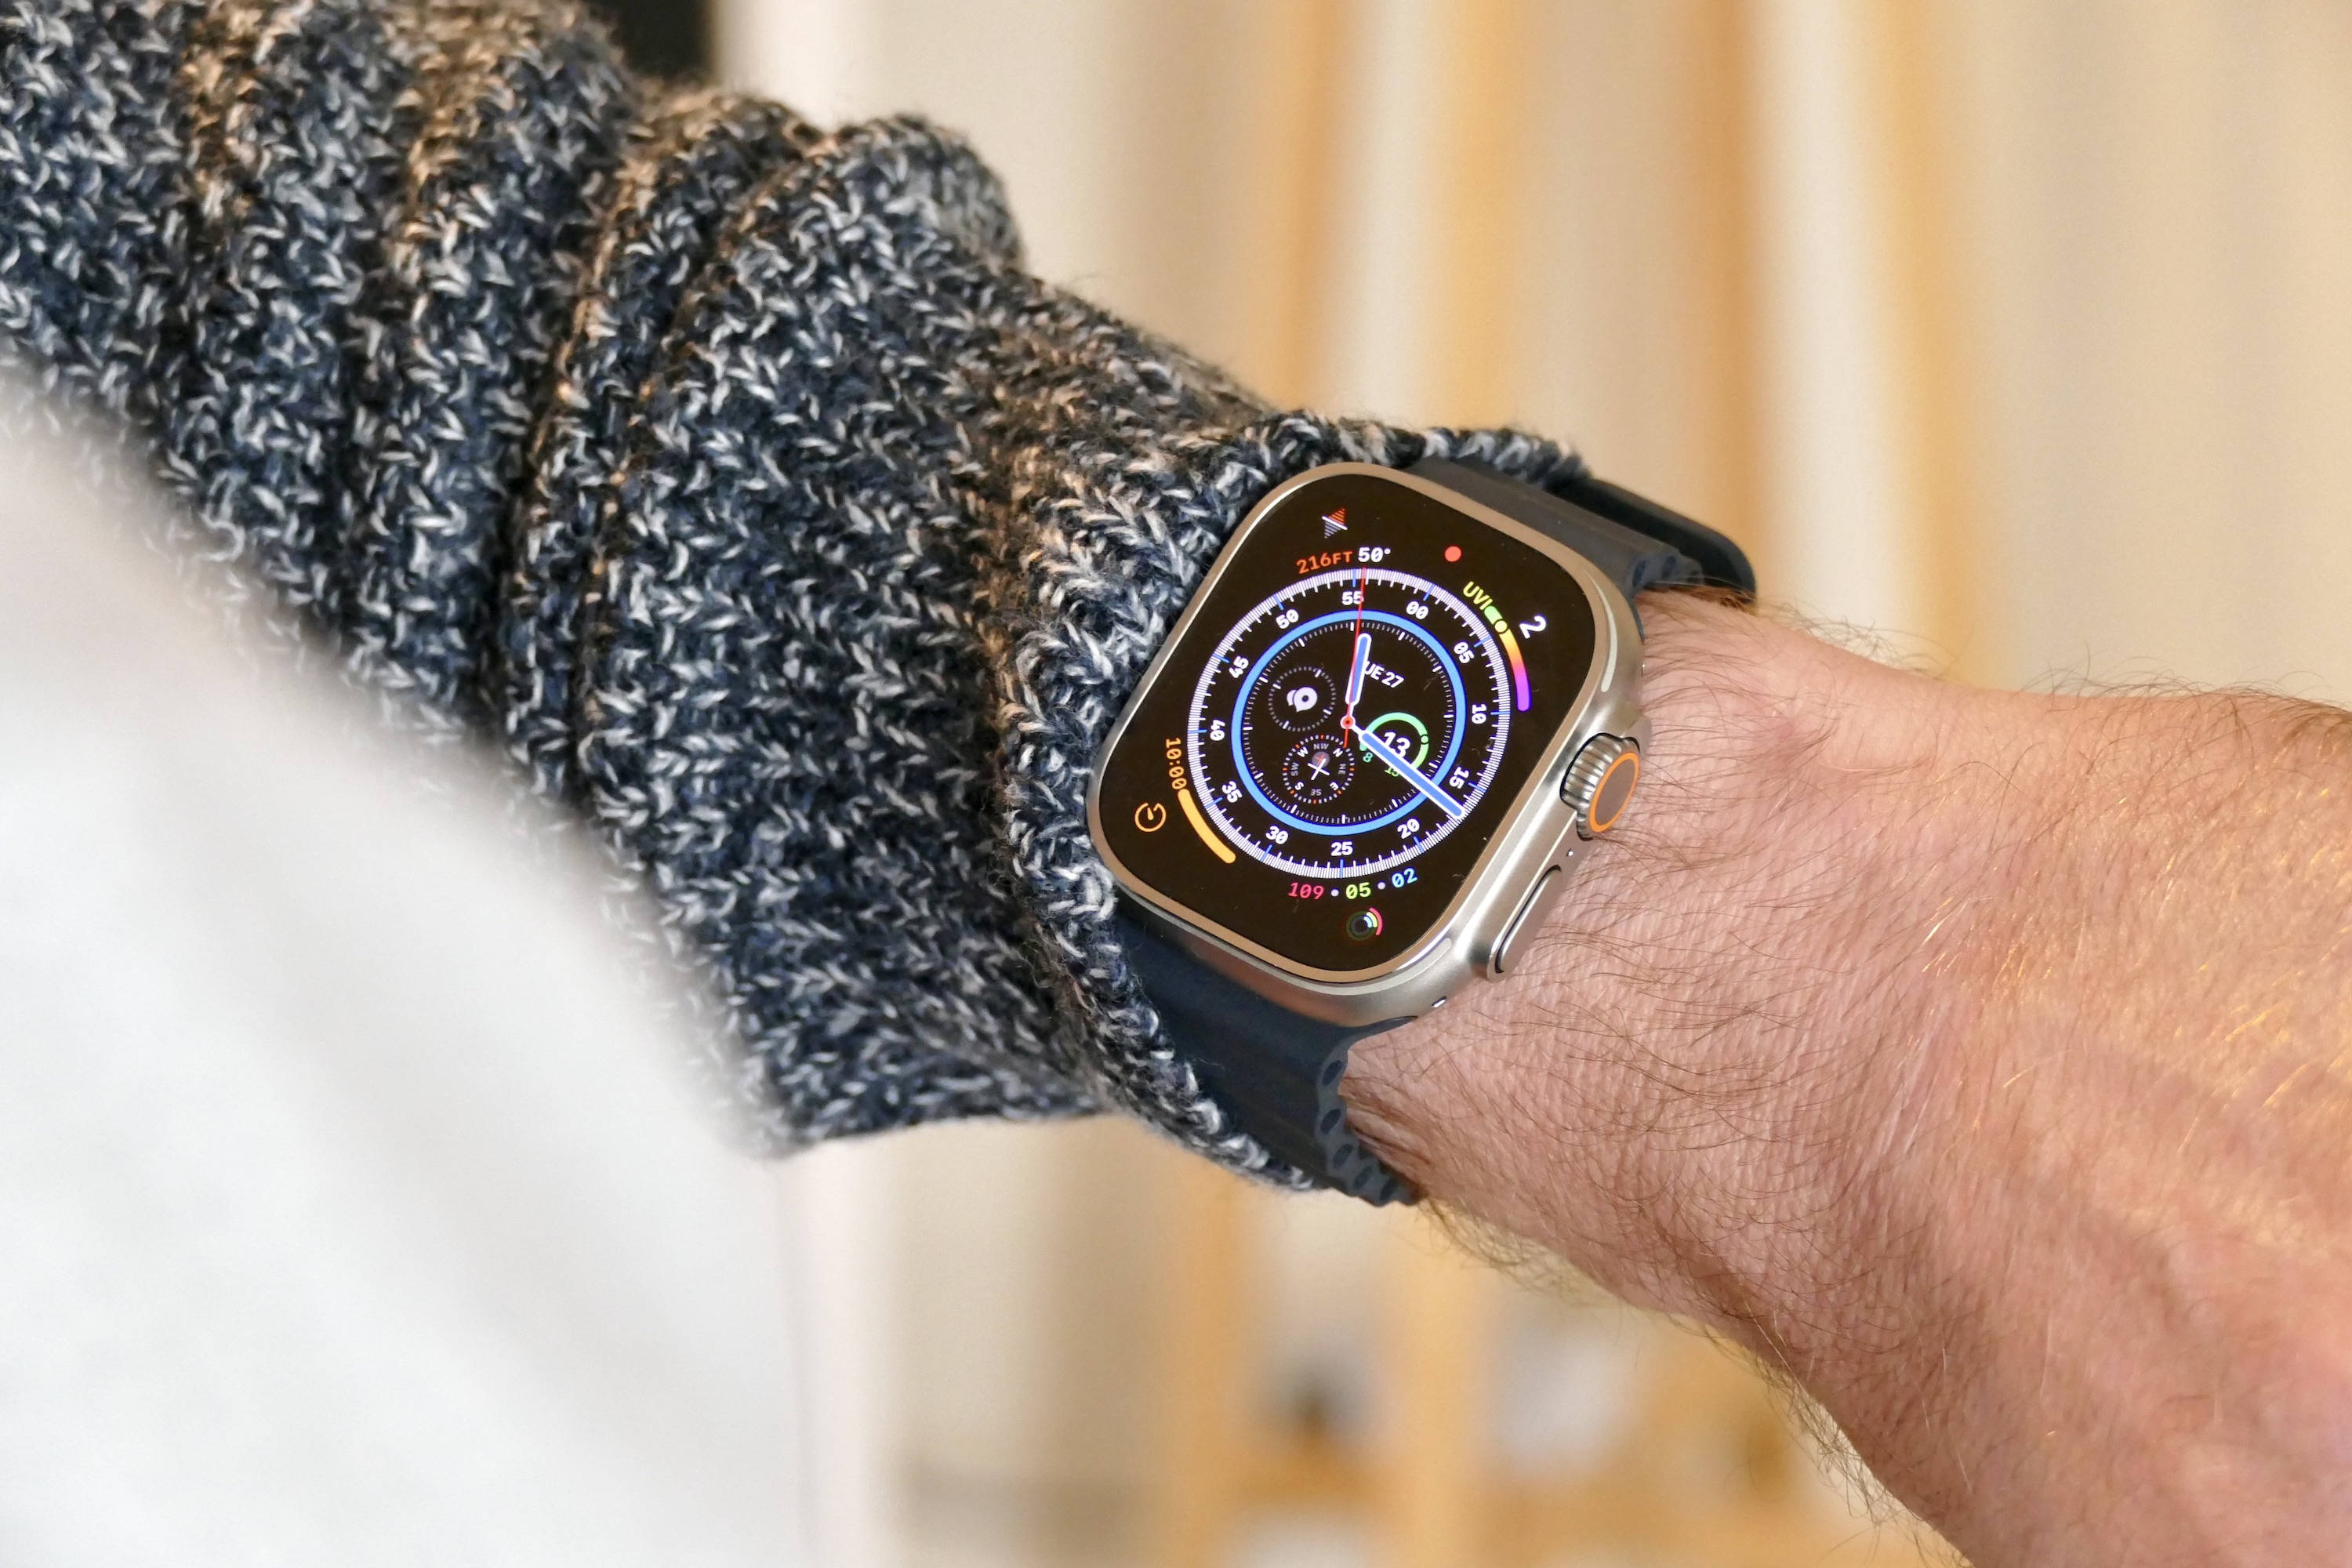 Apple Watch Ultra Hands-On: A Huge, Pricey Smartwatch With a New Look - CNET